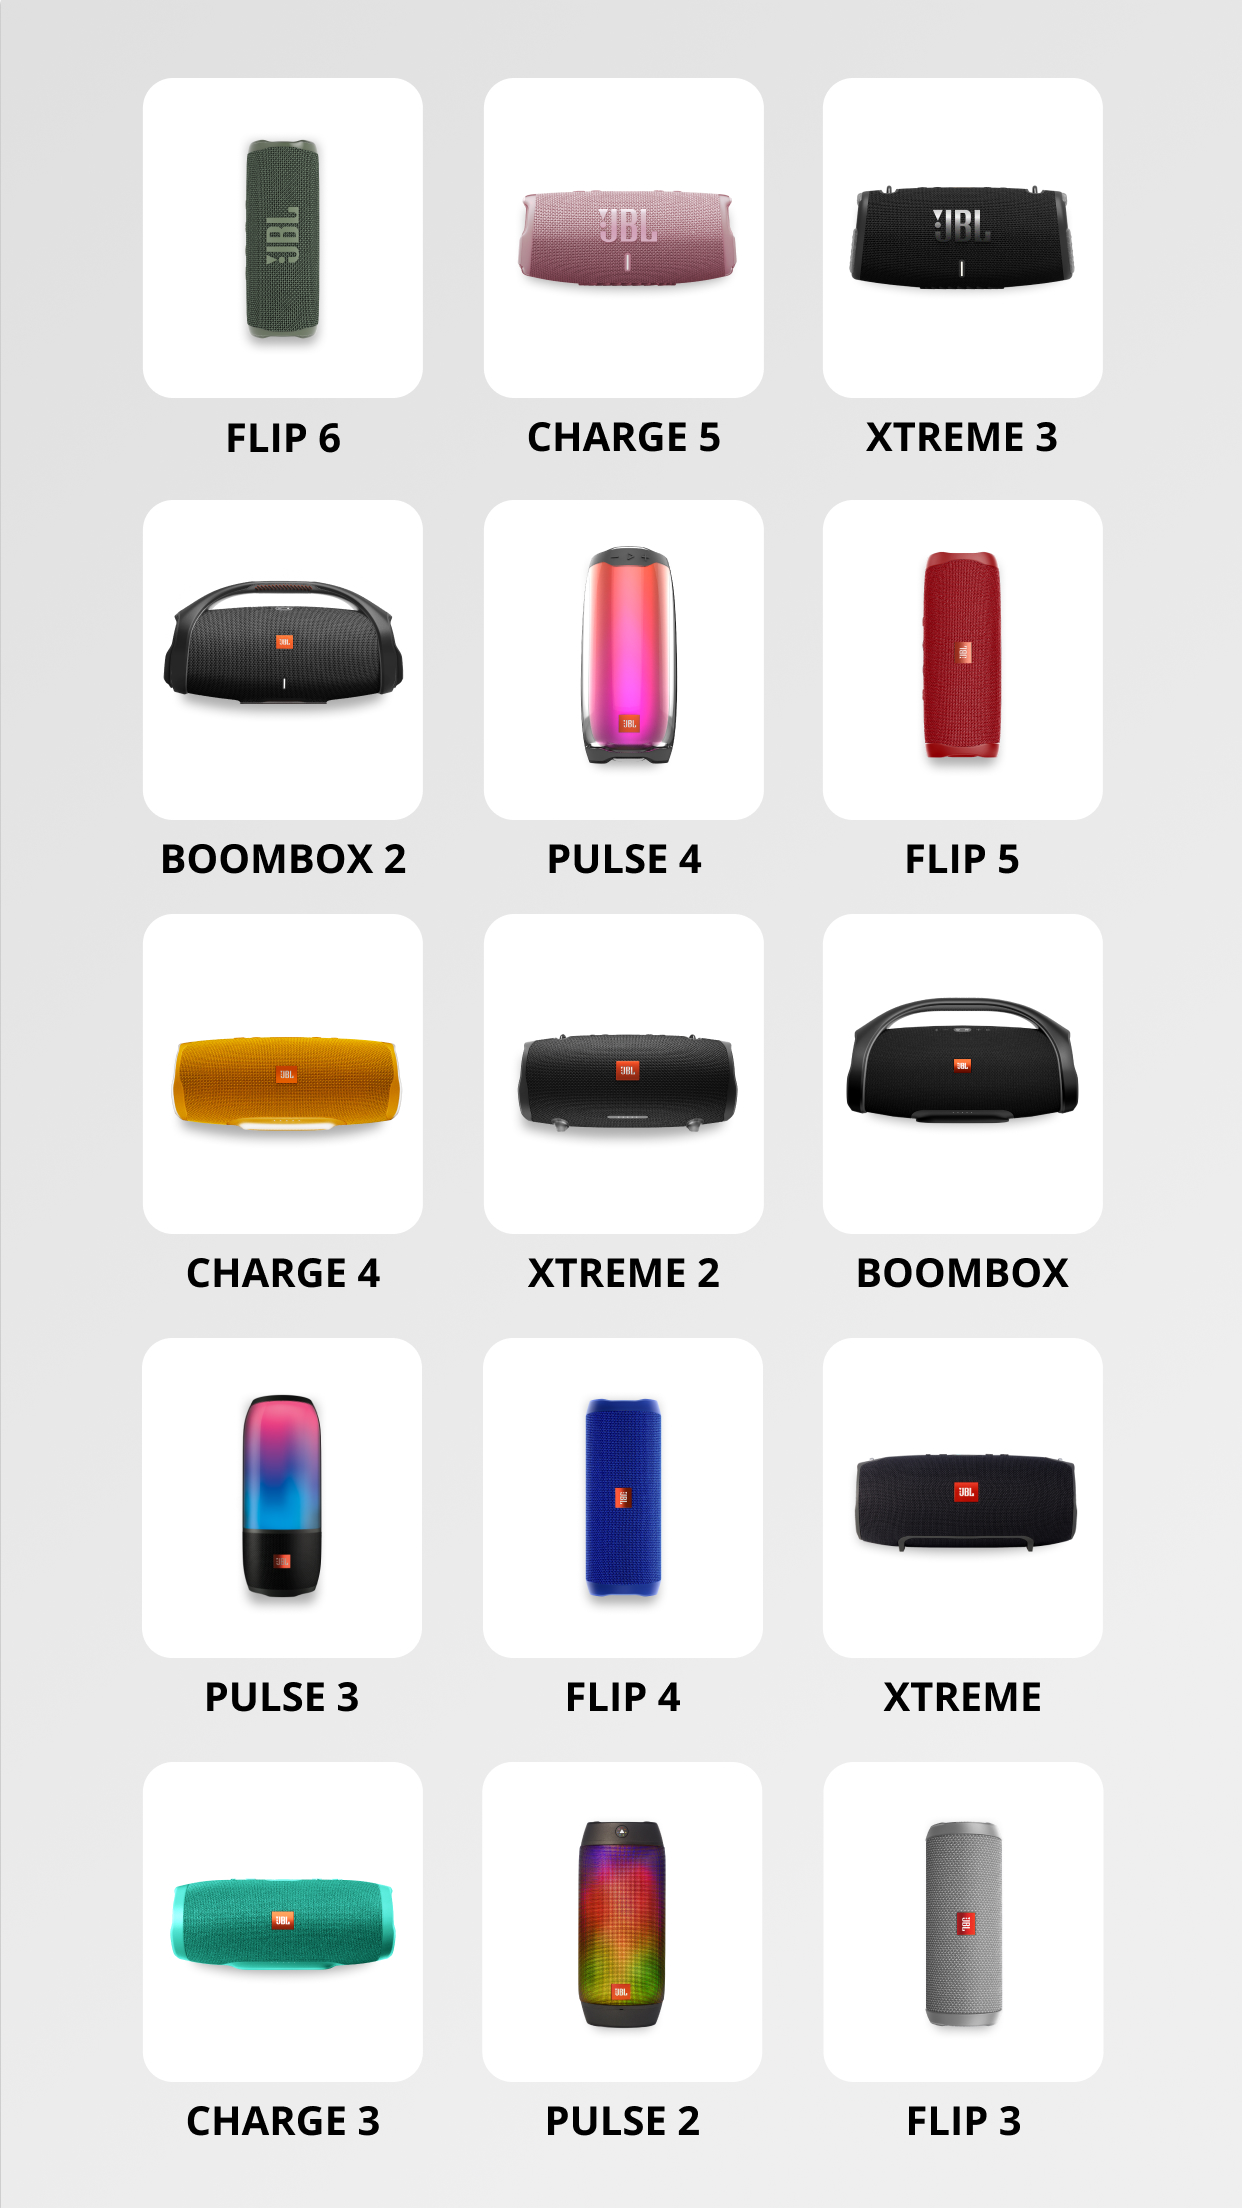 JBL Portable: Formerly named JBL Connect APK 5.4.25 for Android – Download  JBL Portable: Formerly named JBL Connect APK Latest Version from APKFab.com